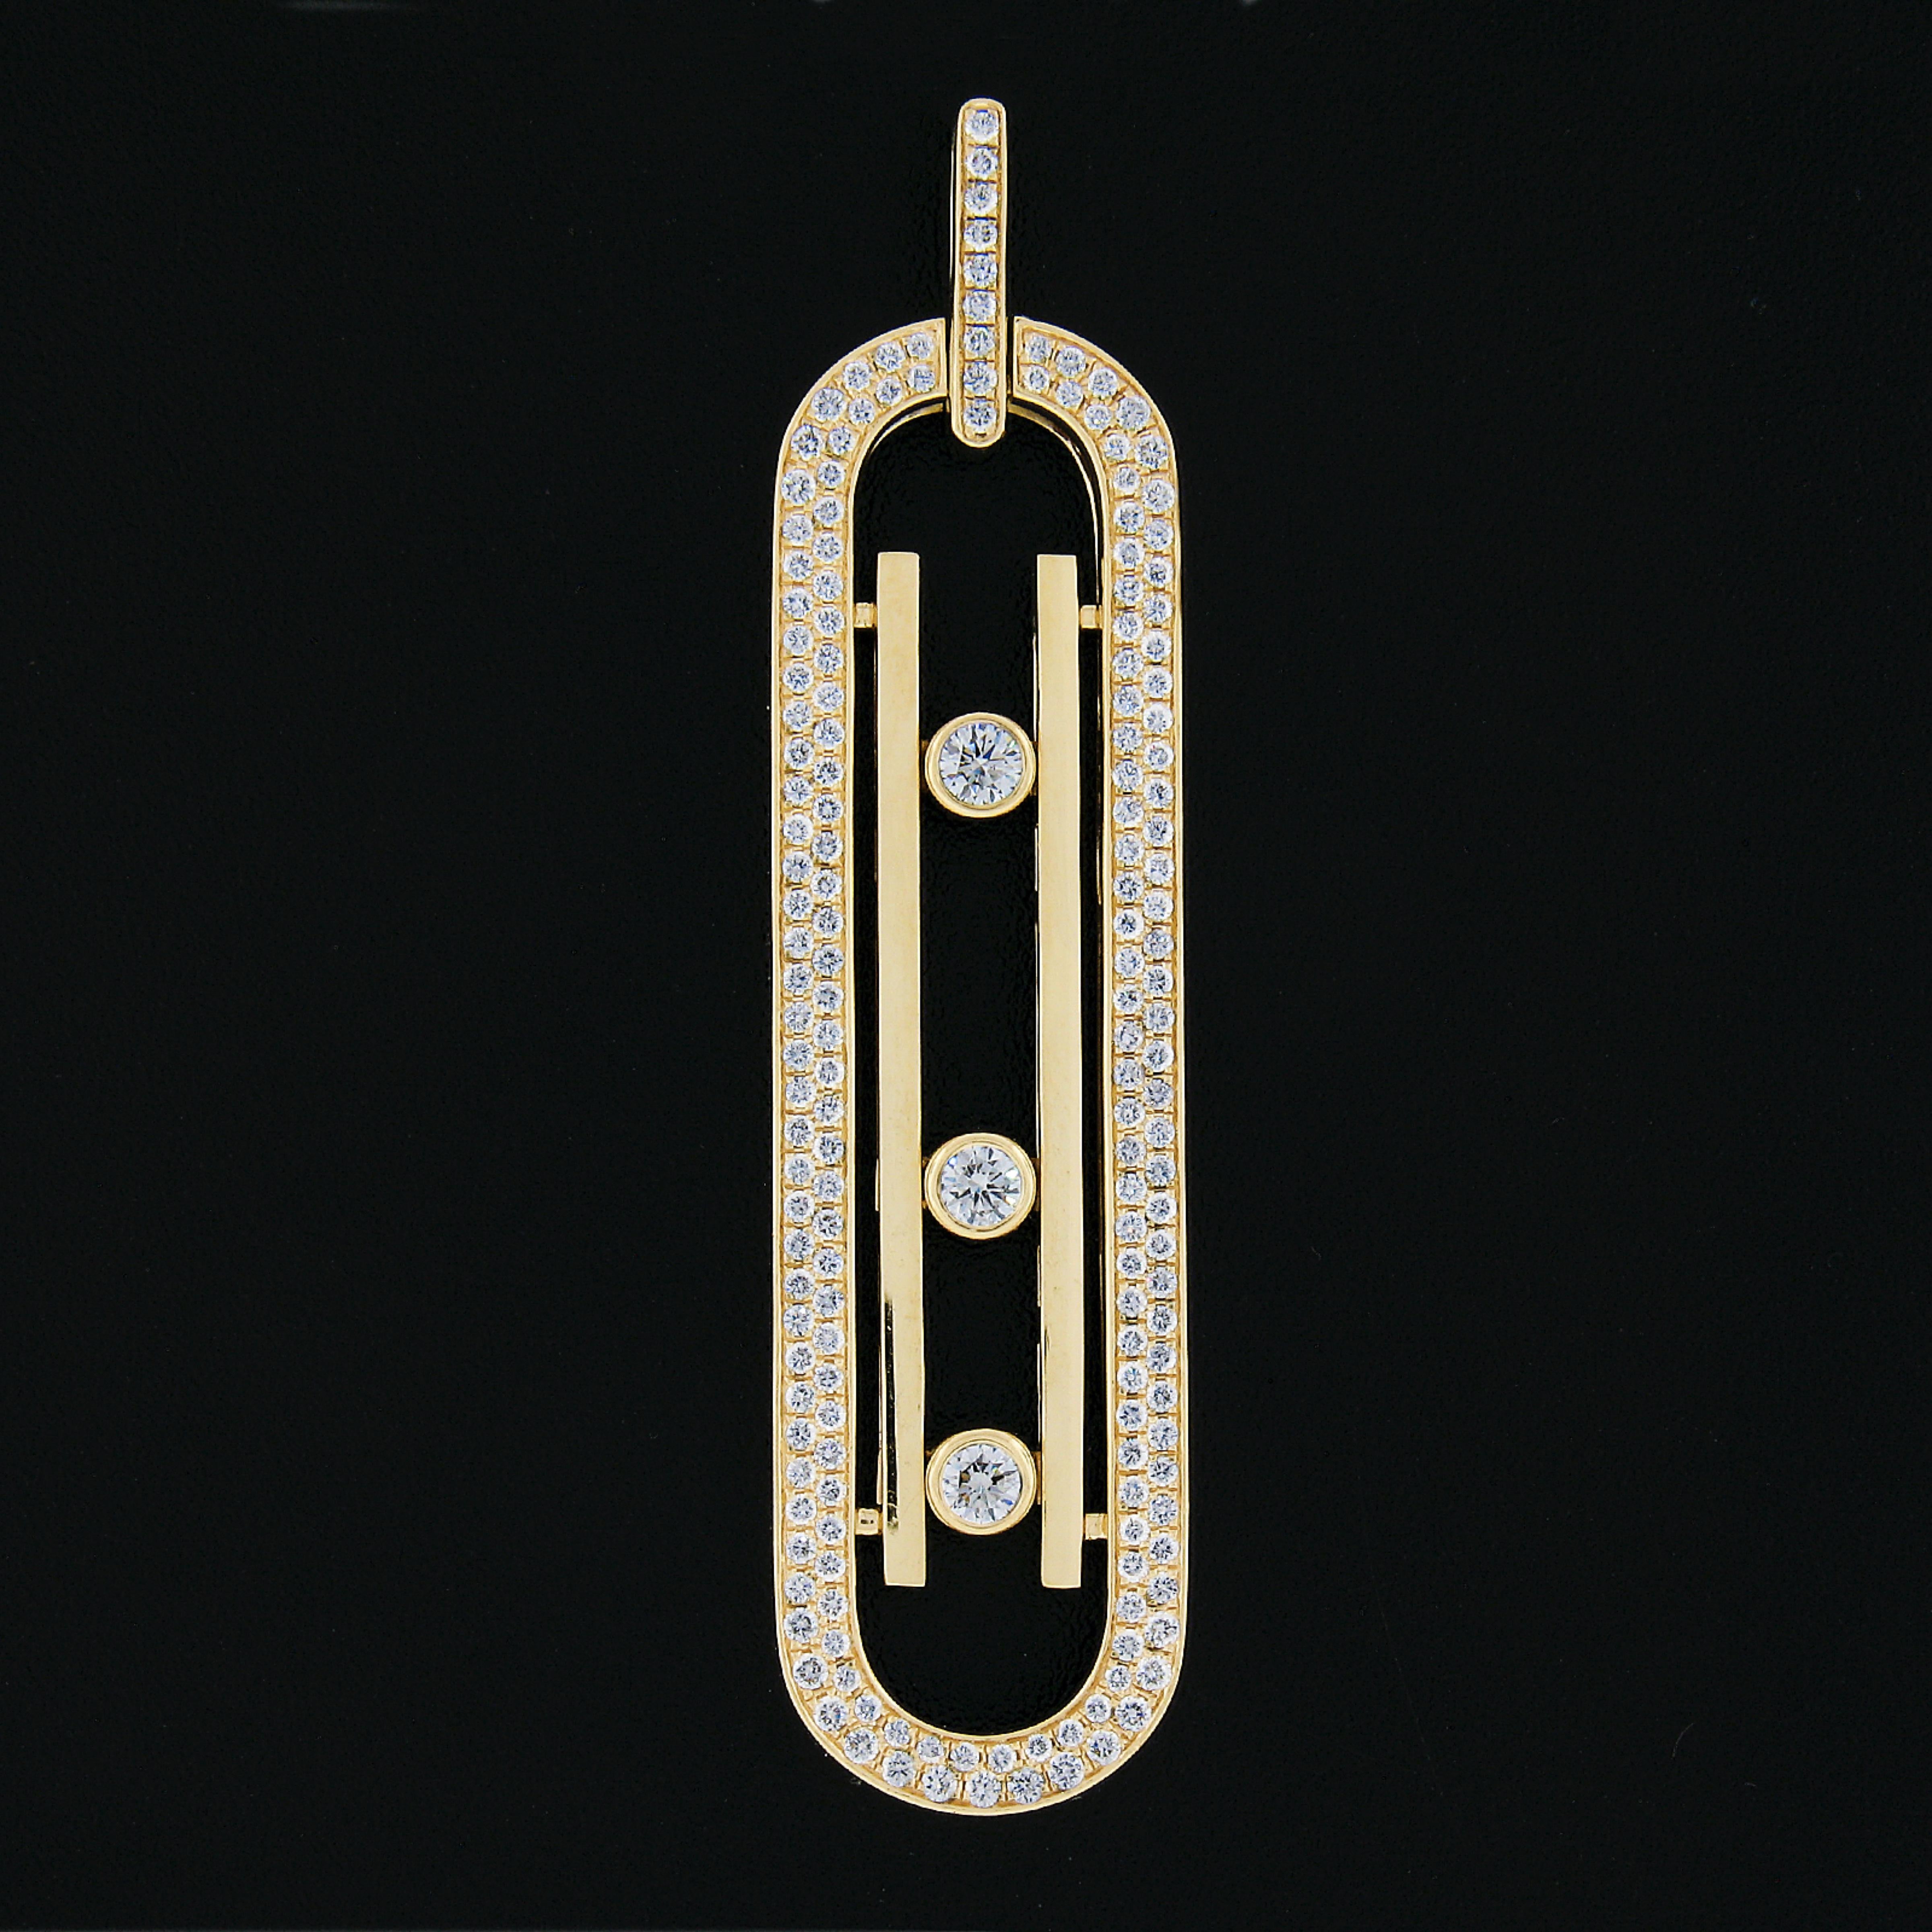 Here we have a beautiful large oval bar pendant by MESSIKA that is crafted in solid 18k yellow gold. This beautiful design features a numerous pave set diamonds around the frame, the open center have 3 moving diamonds which slide & move within the